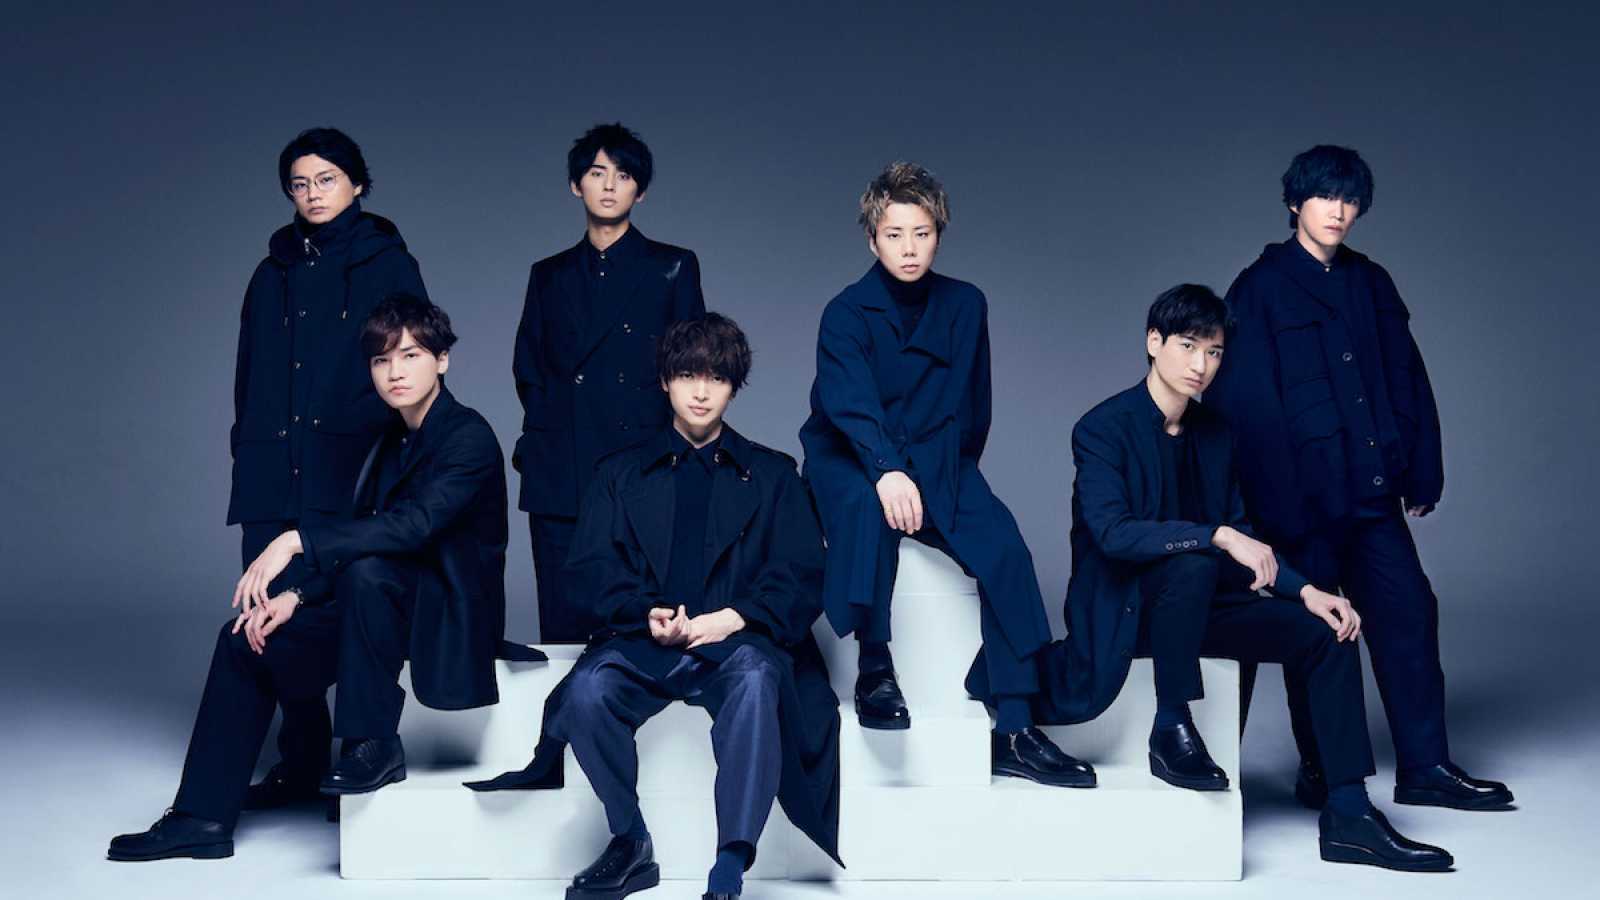 Kis-My-Ft2 Members Premiere Solo Music Videos on YouTube © Kis-My-Ft2. All rights reserved.